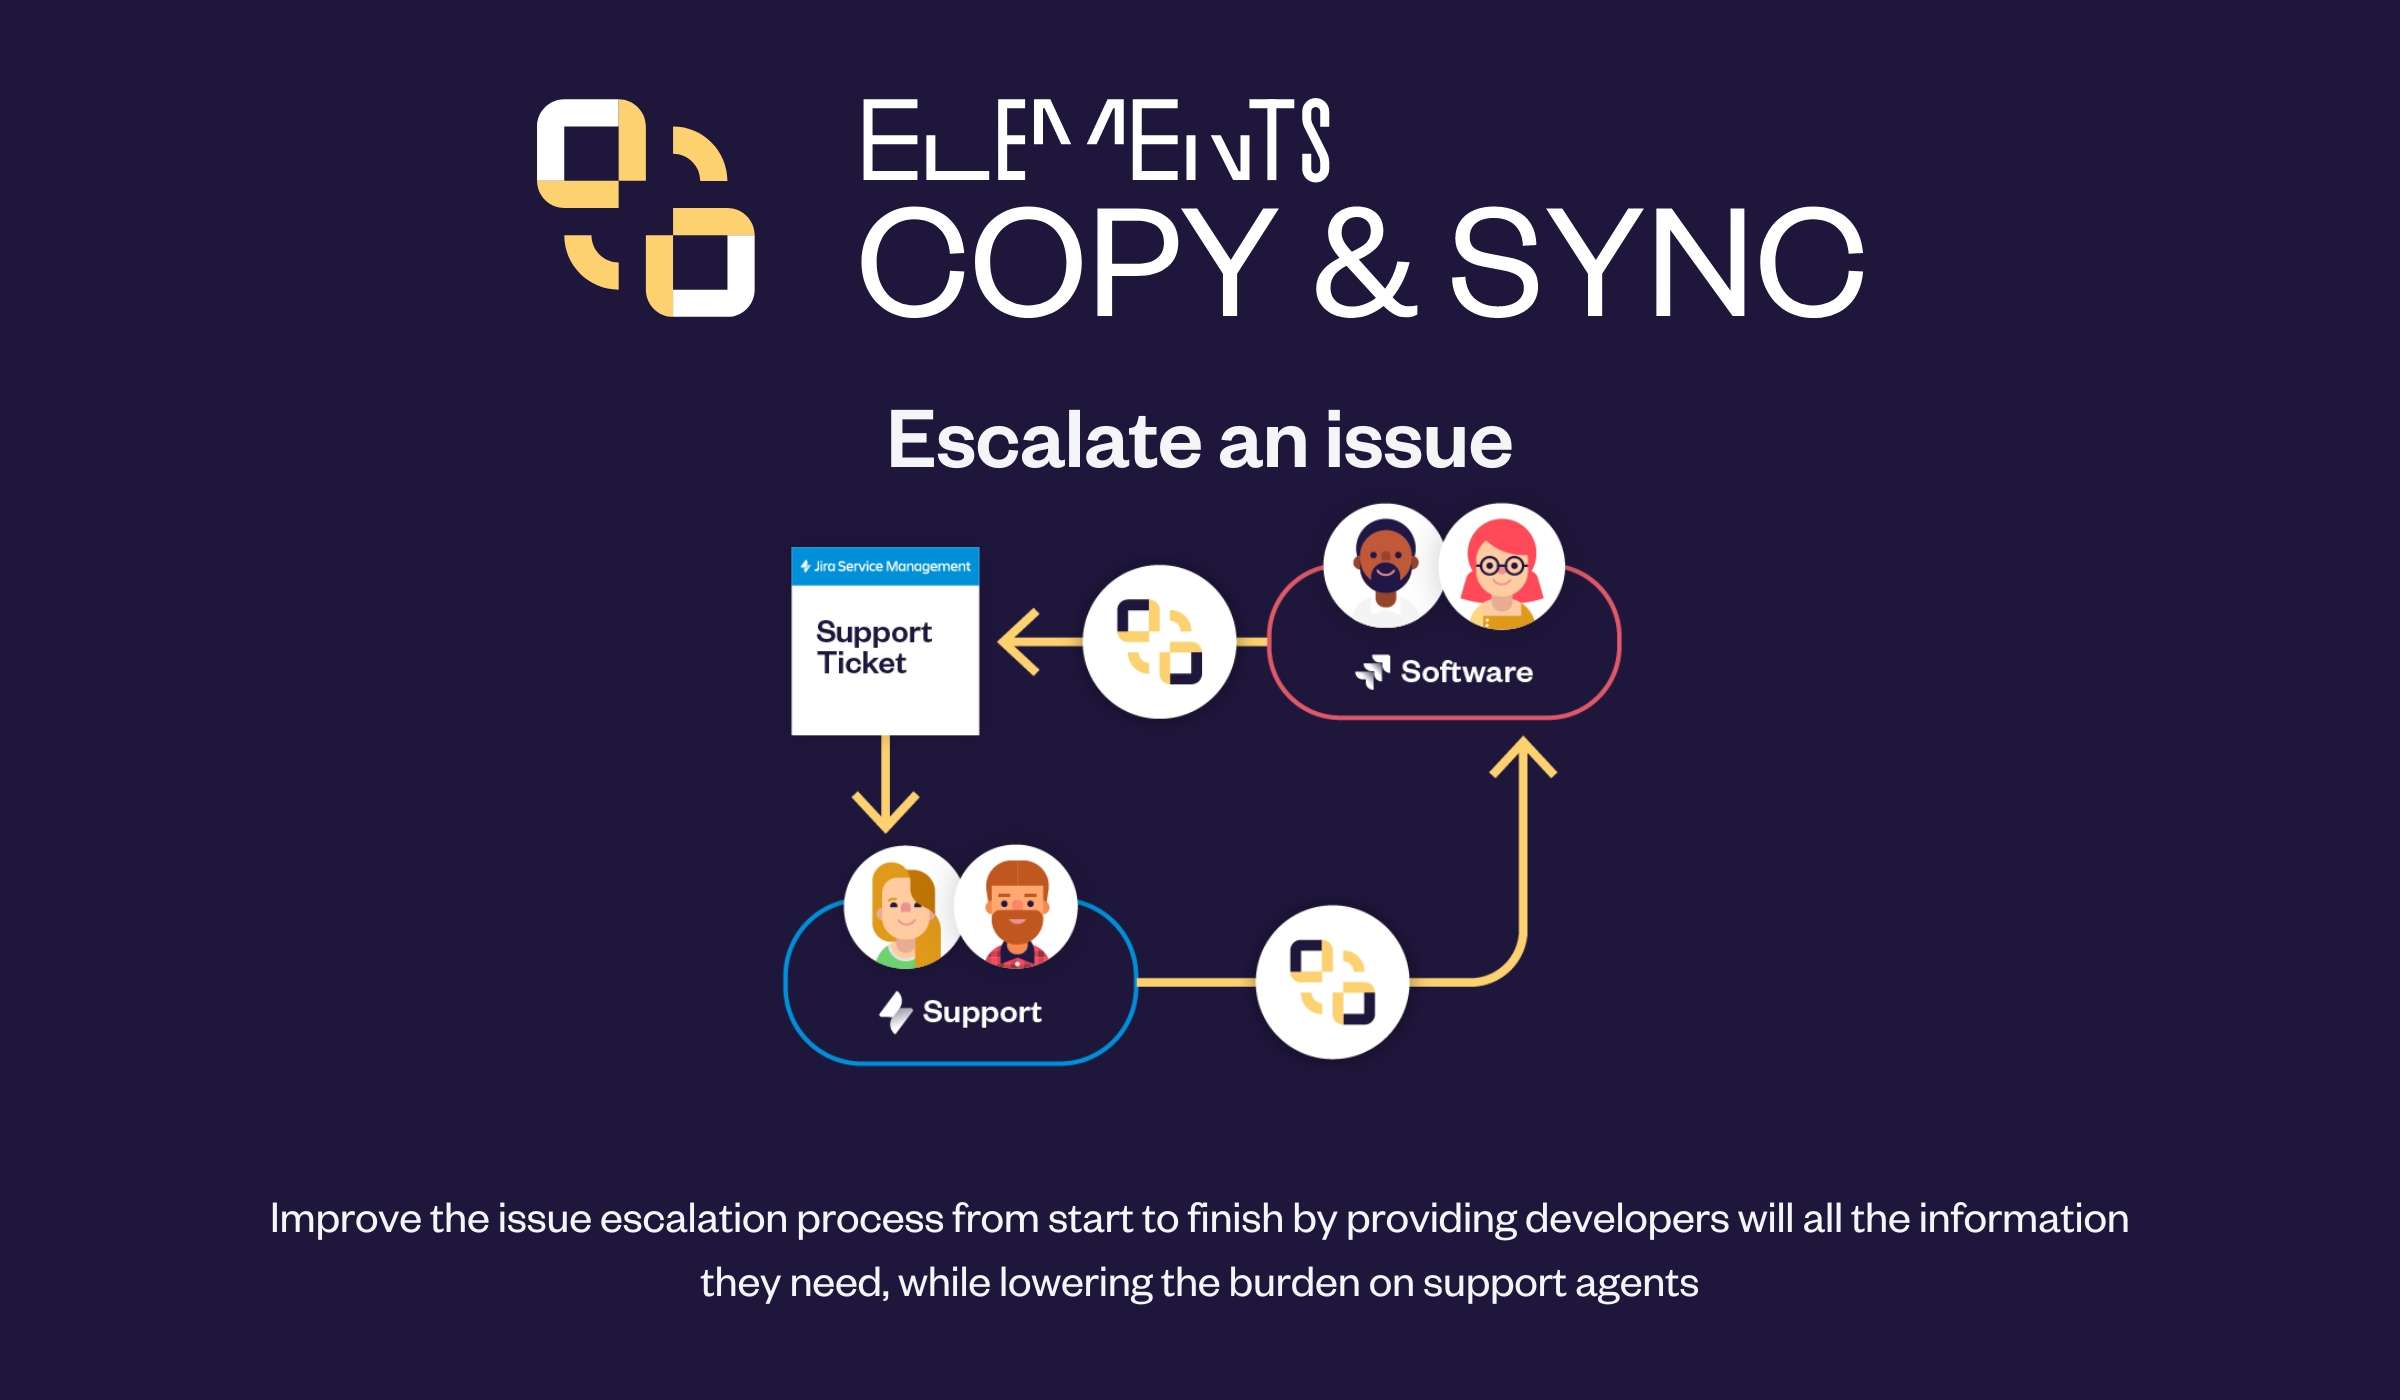 Let's see how Elements Copy & Sync can help you maintain customer satisfaction during support experience and reduce time to resolution, by automatically escalating issues from JSM to Jira Software.